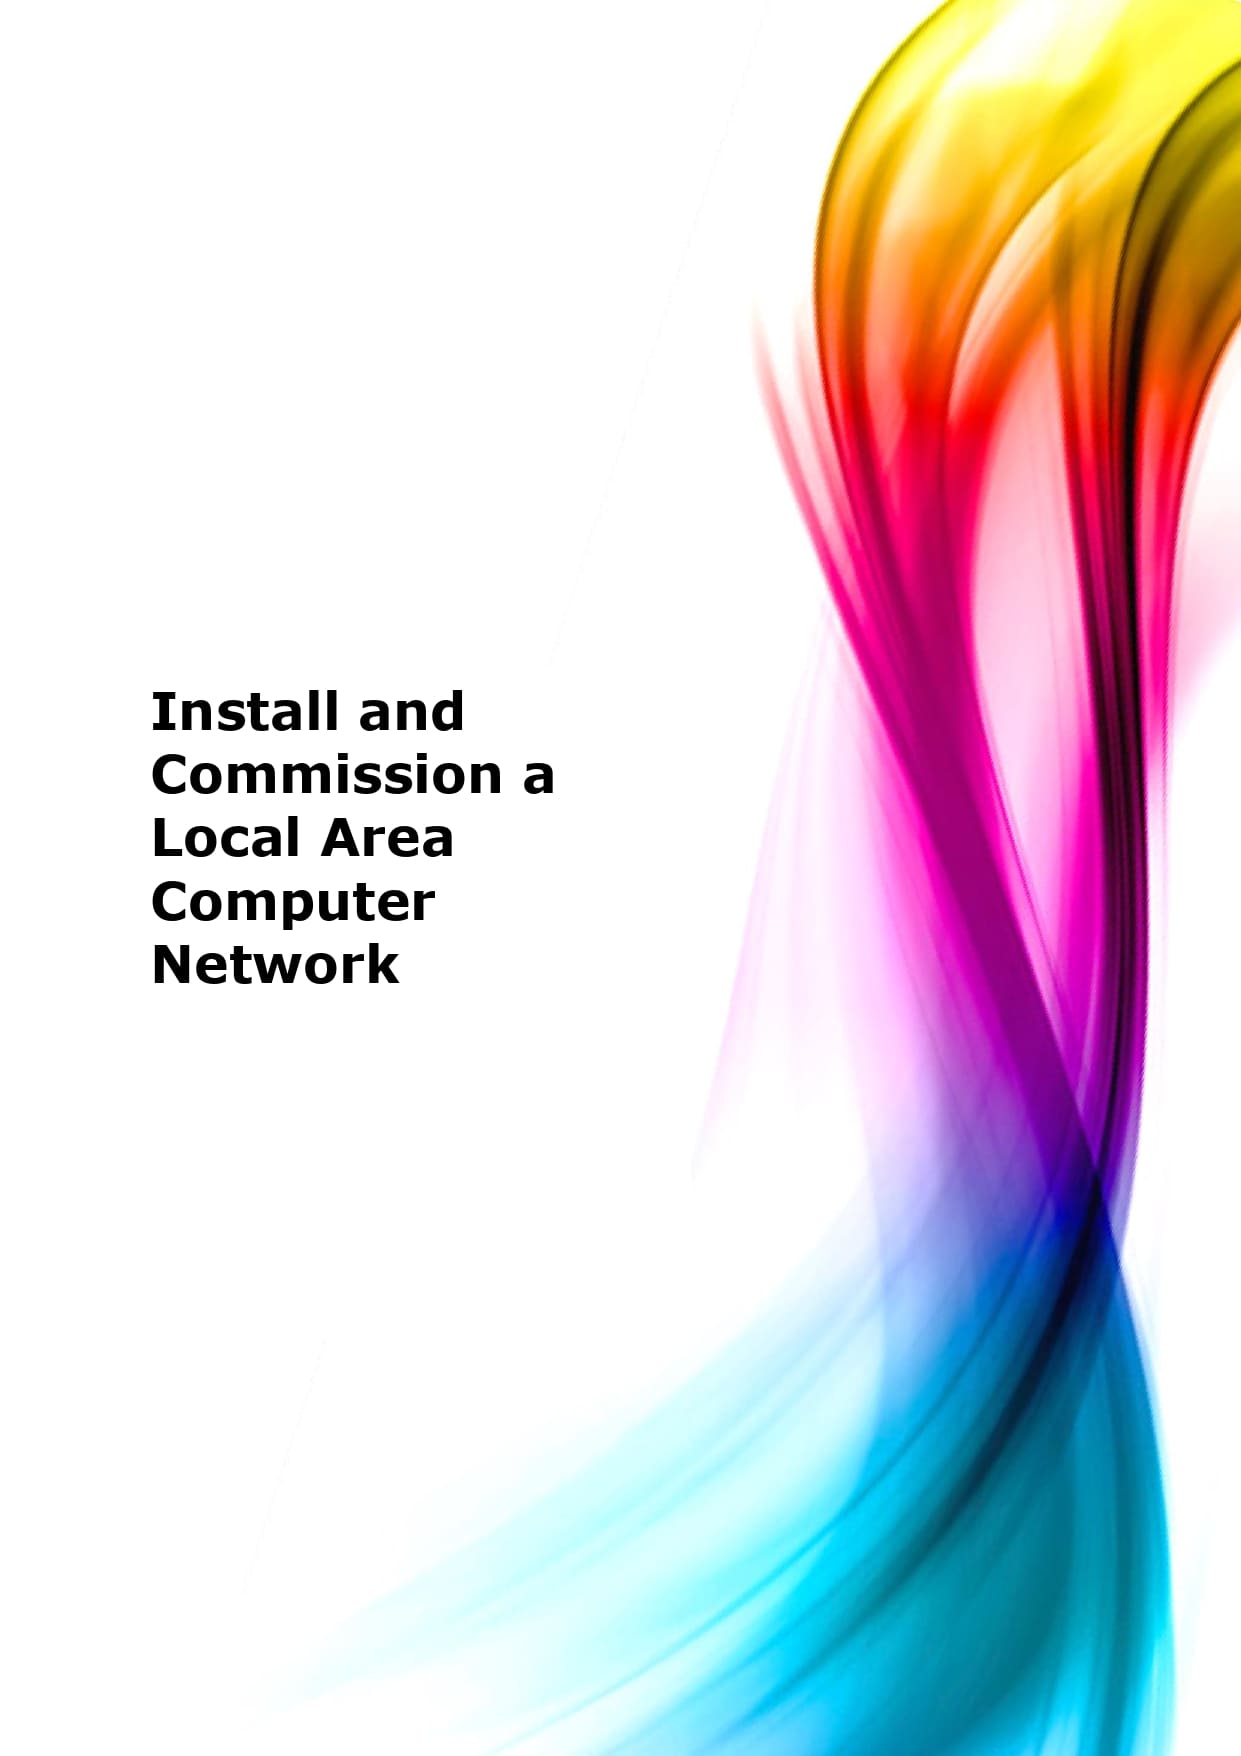 Install and commission a local area computer network